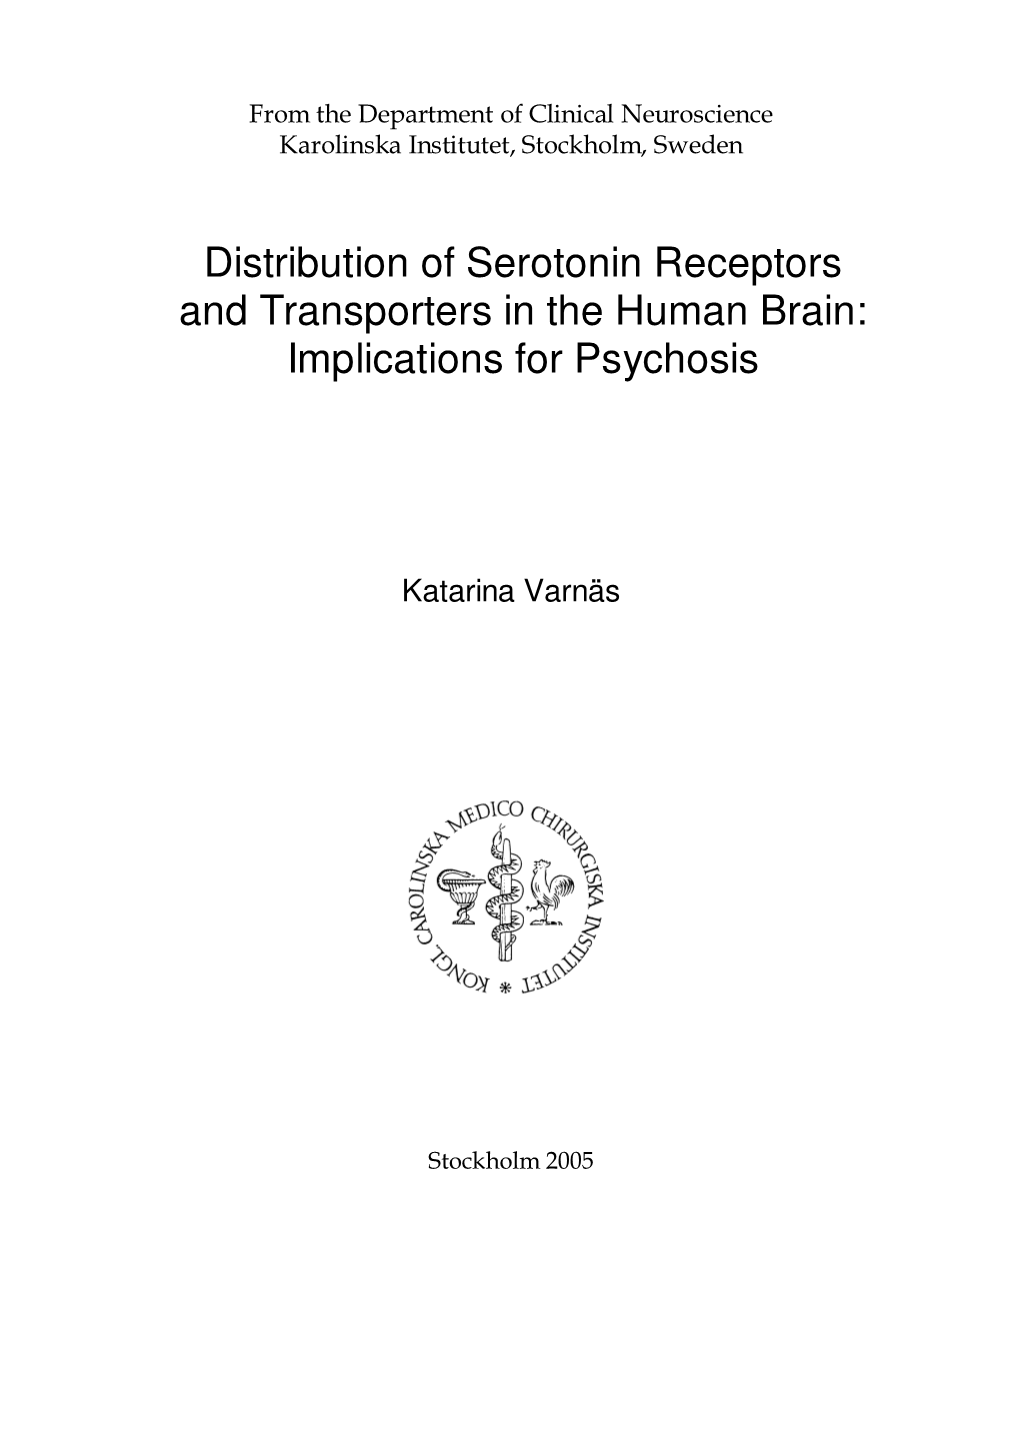 Distribution of Serotonin Receptors and Transporters in the Human Brain: Implications for Psychosis